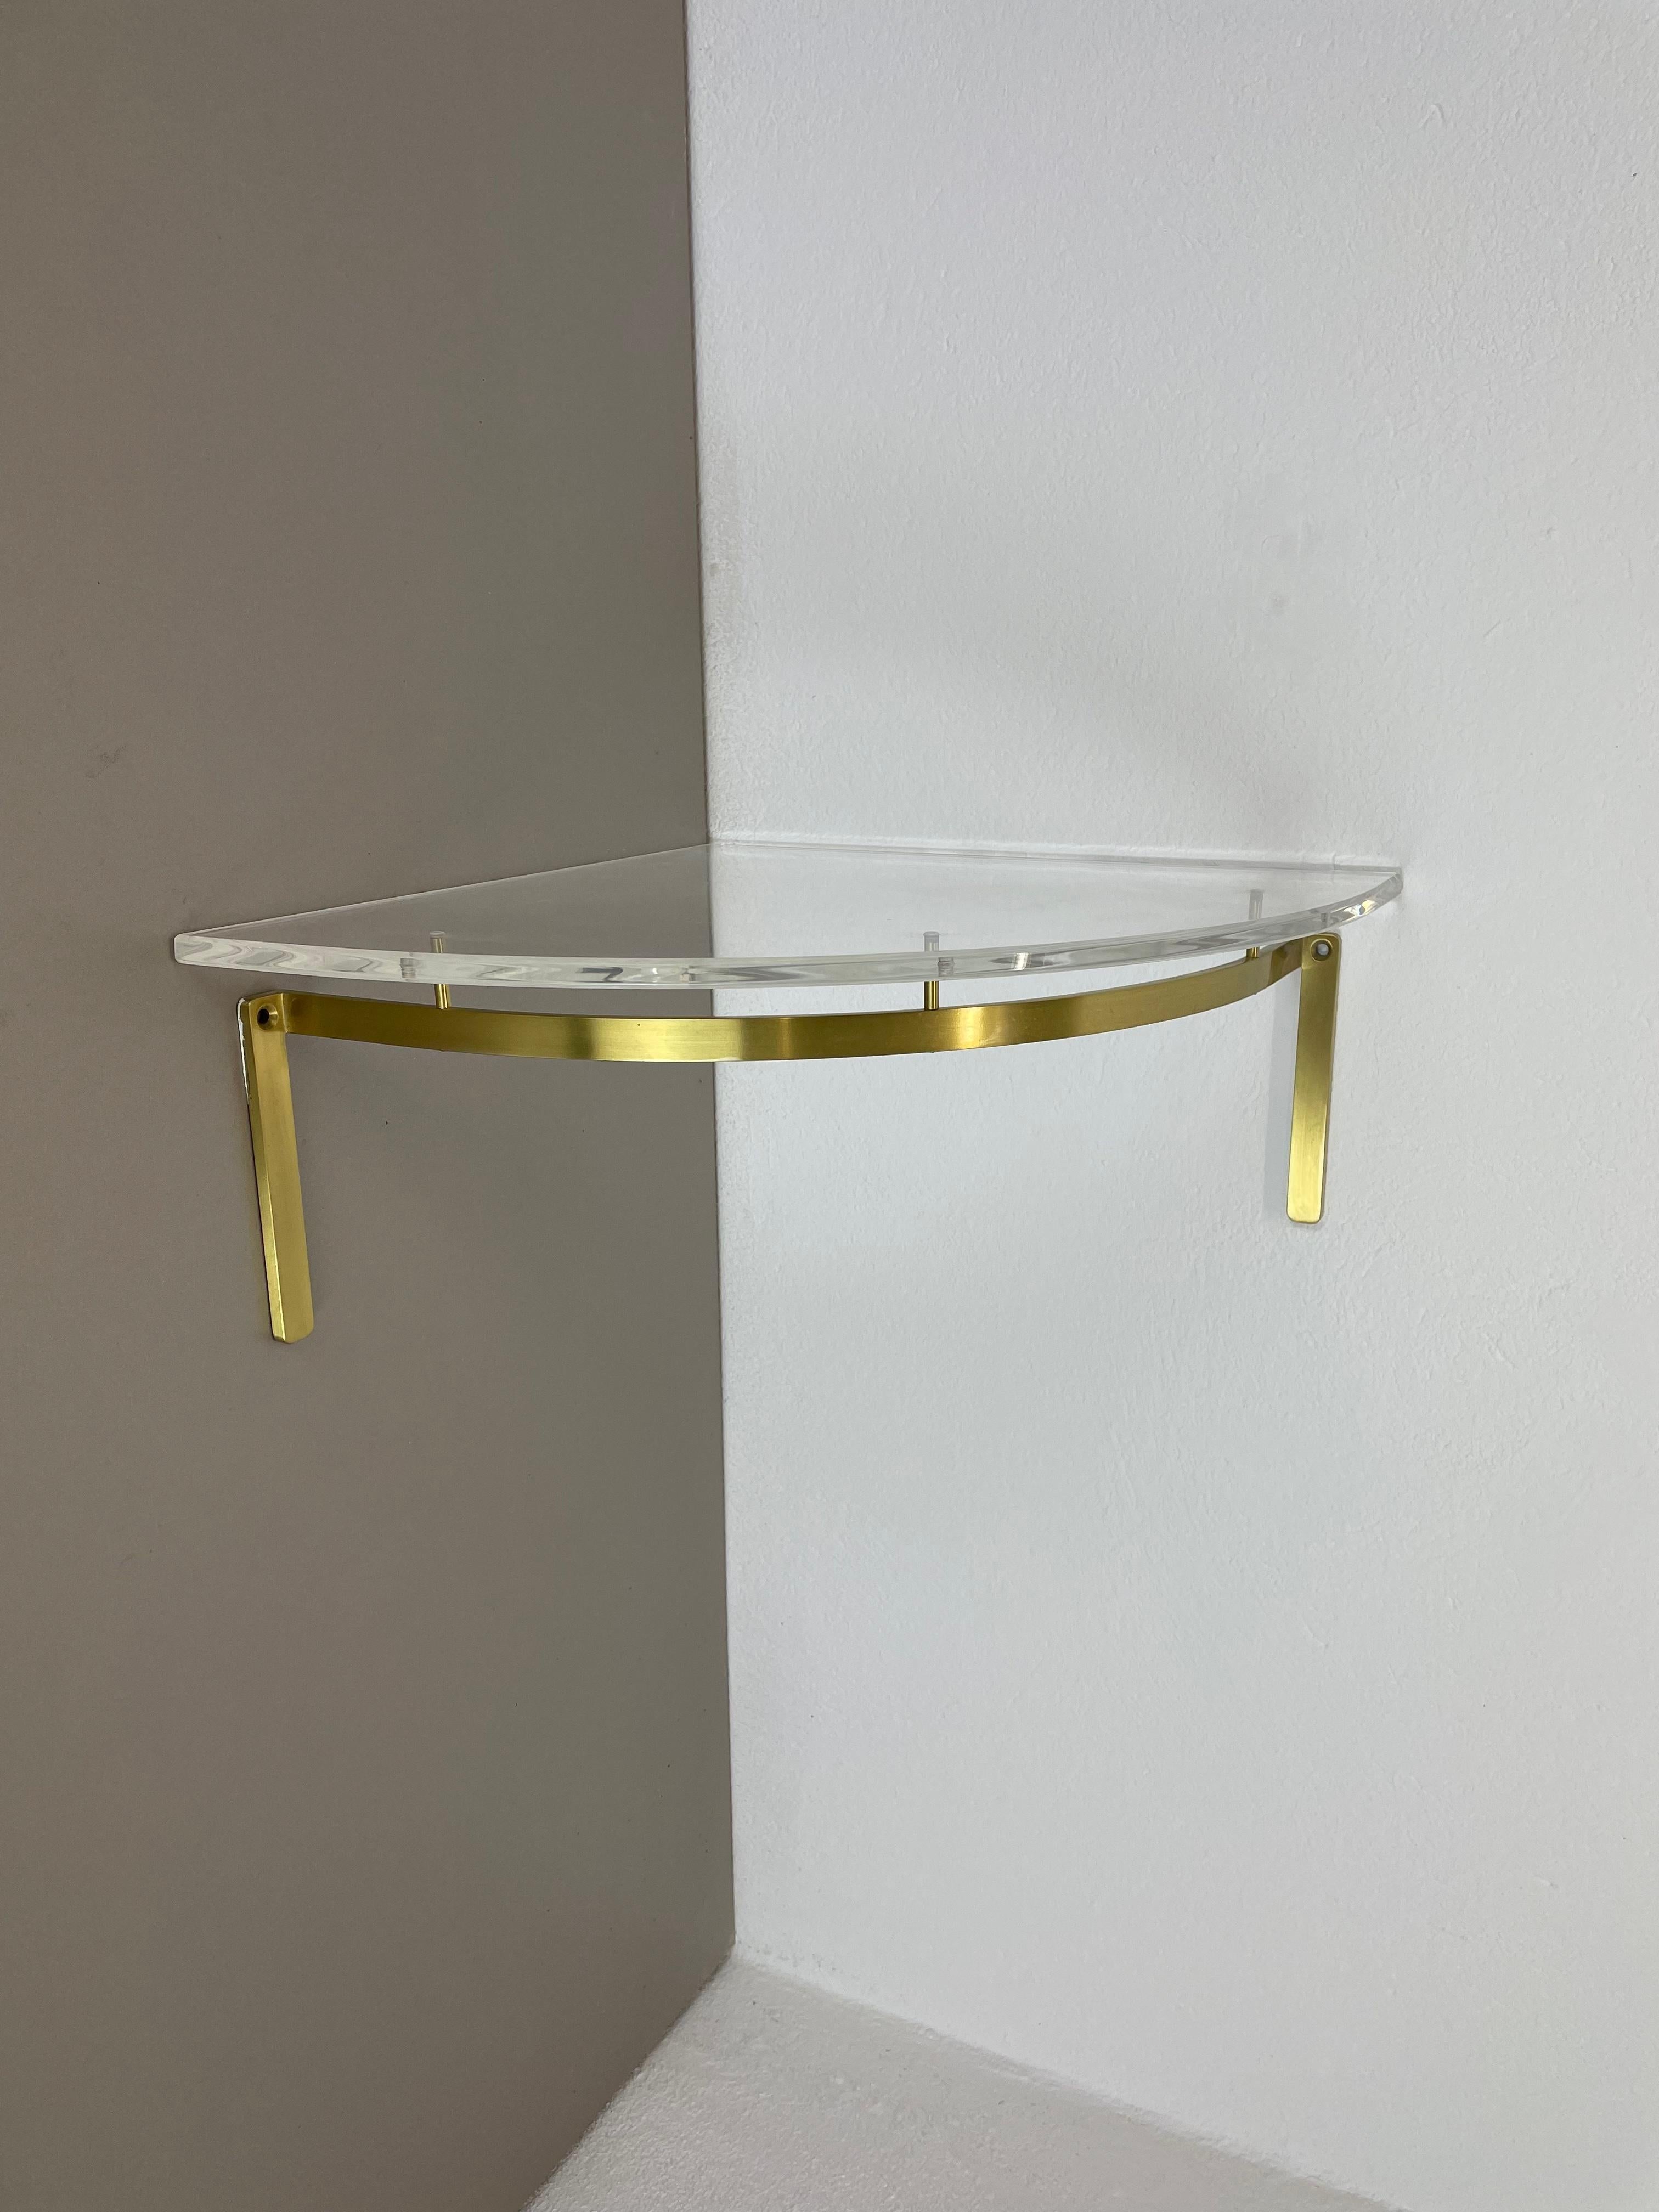 Mid-Century Modern Hollywood Regency Solid Brass Acryl Glass Corner wall board Unit, Italy 1970s For Sale